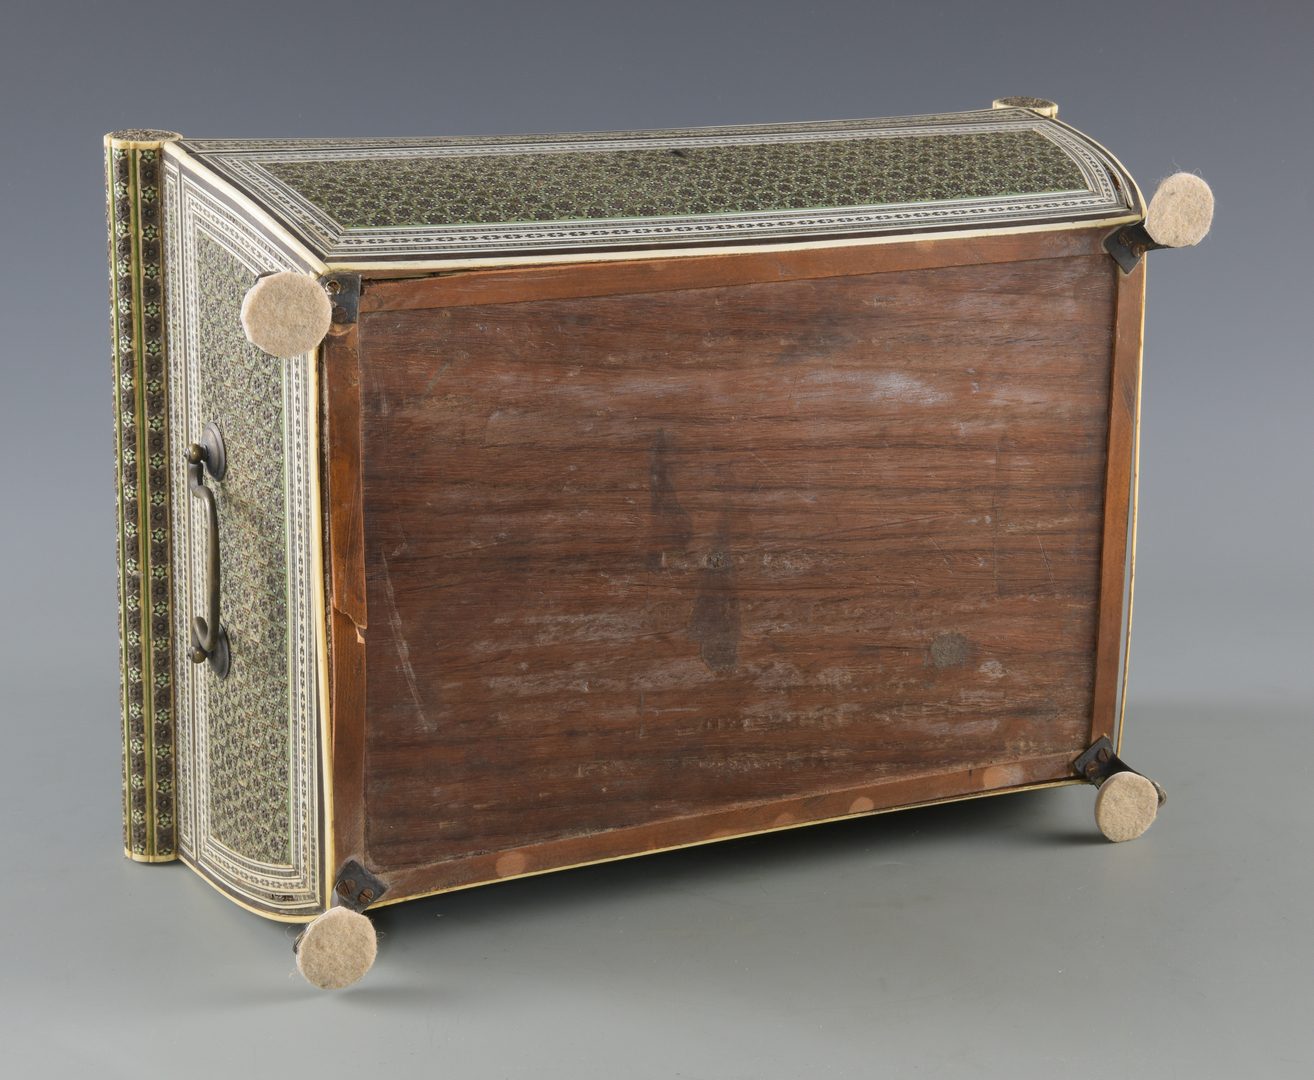 Lot 146: Anglo-Indian Marquetry Box